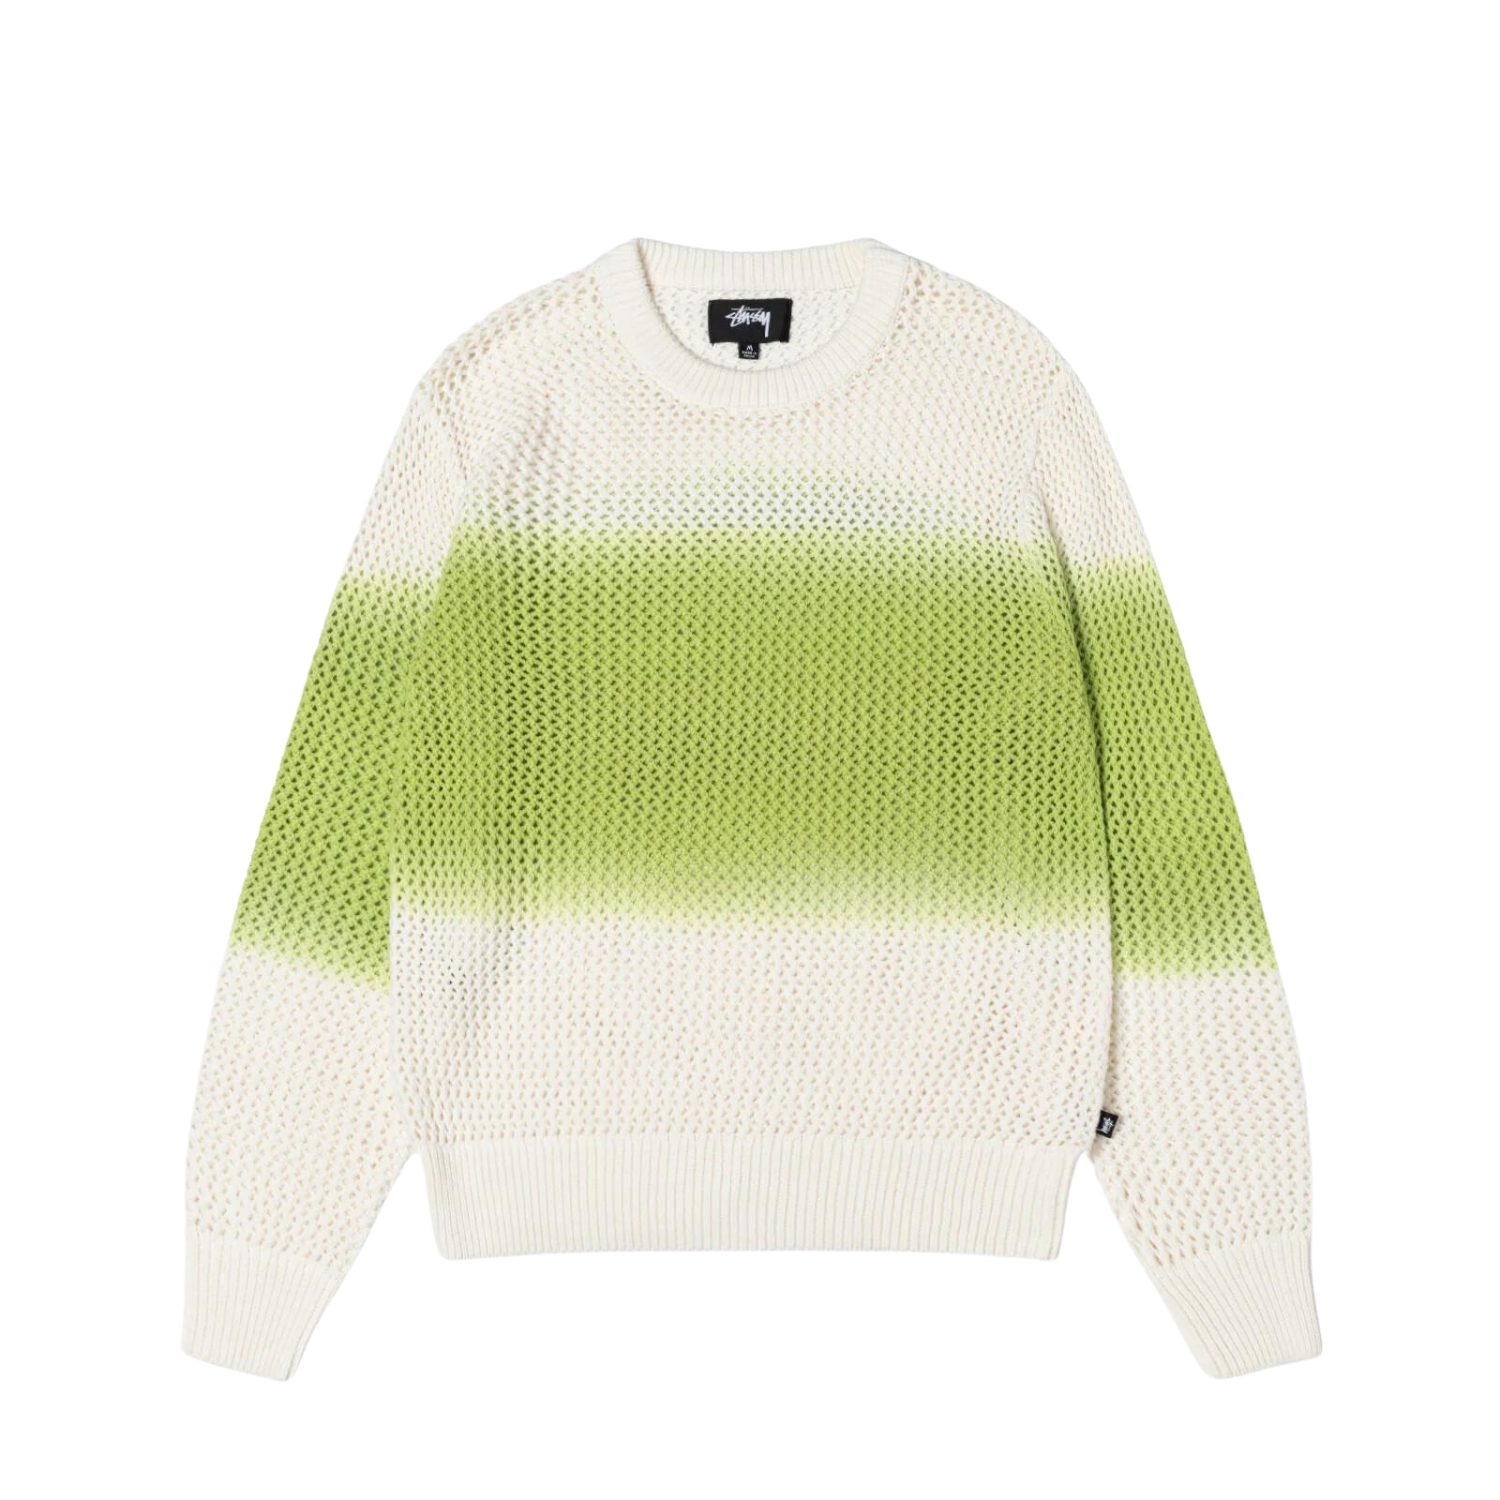 PIG. DYED LOOSE GUAGE SWEATER